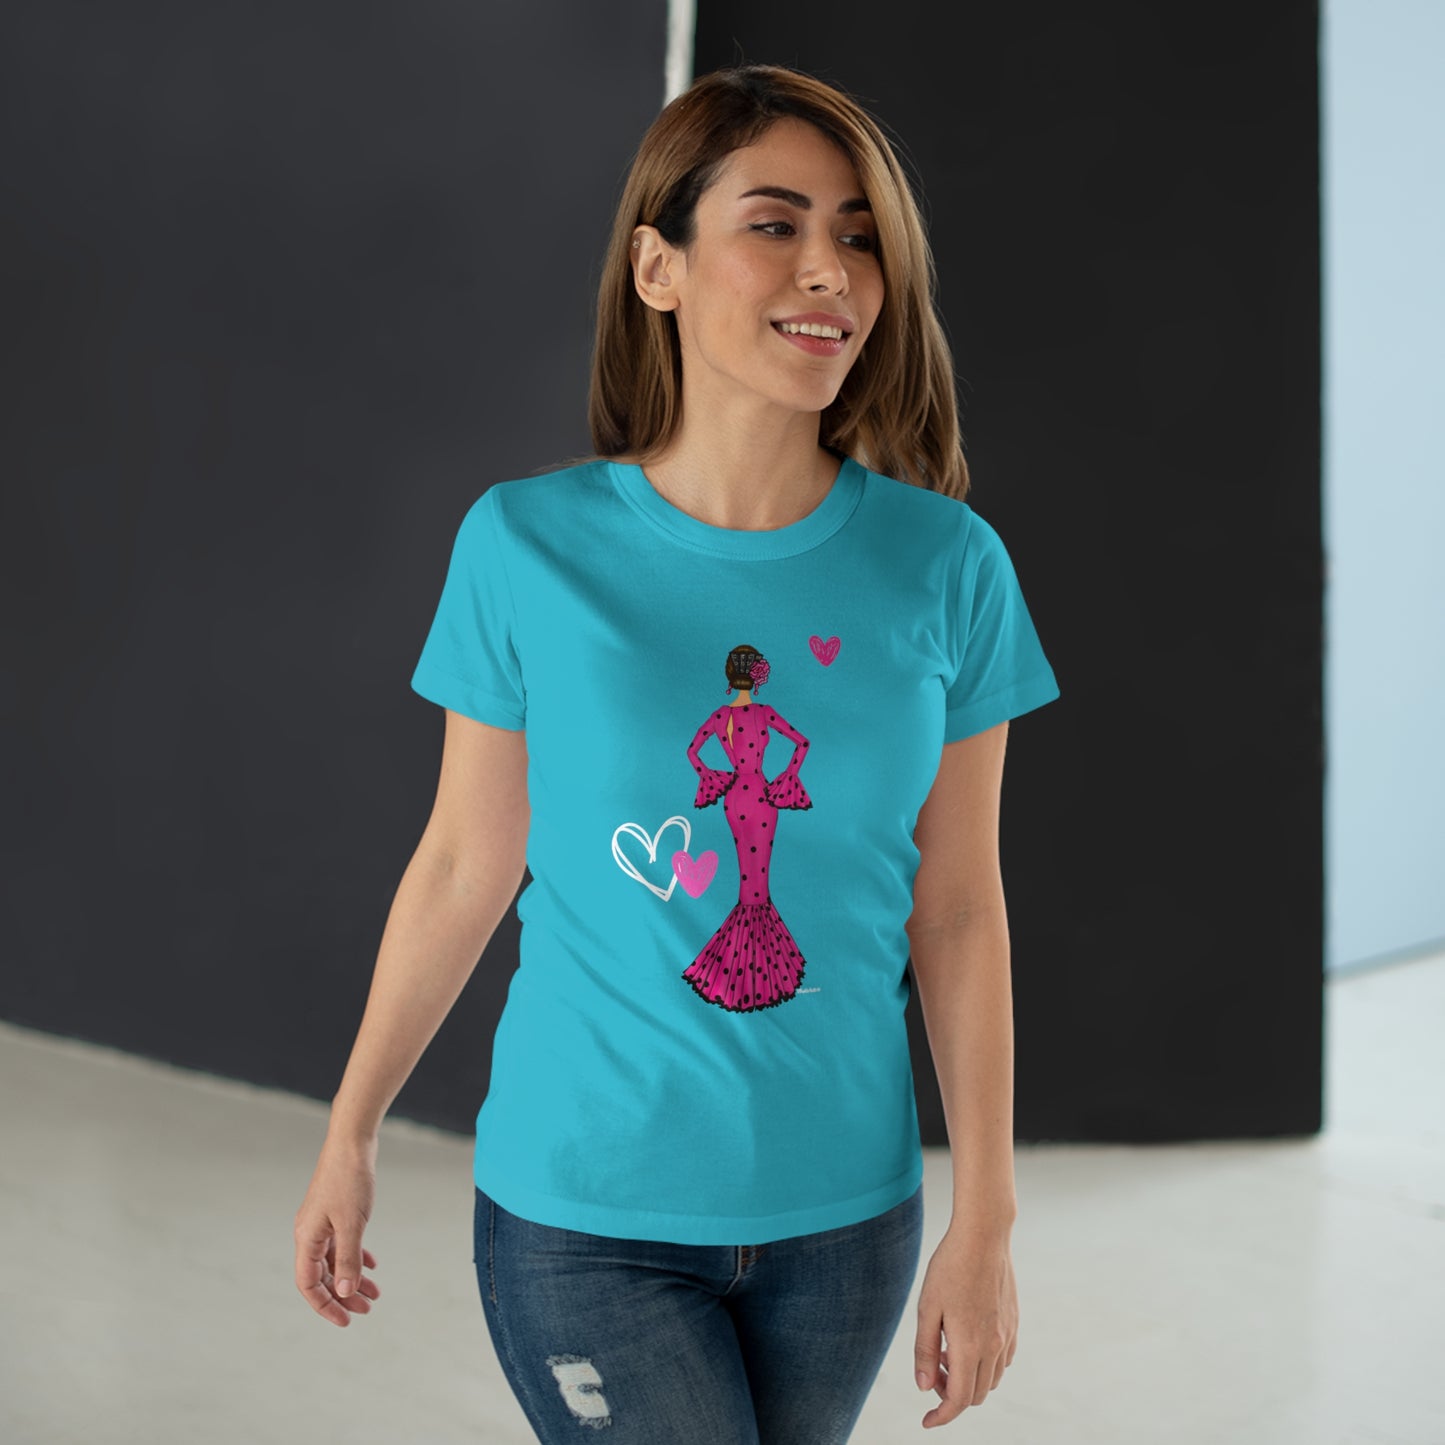 a woman wearing a blue t - shirt with a pink dress on it